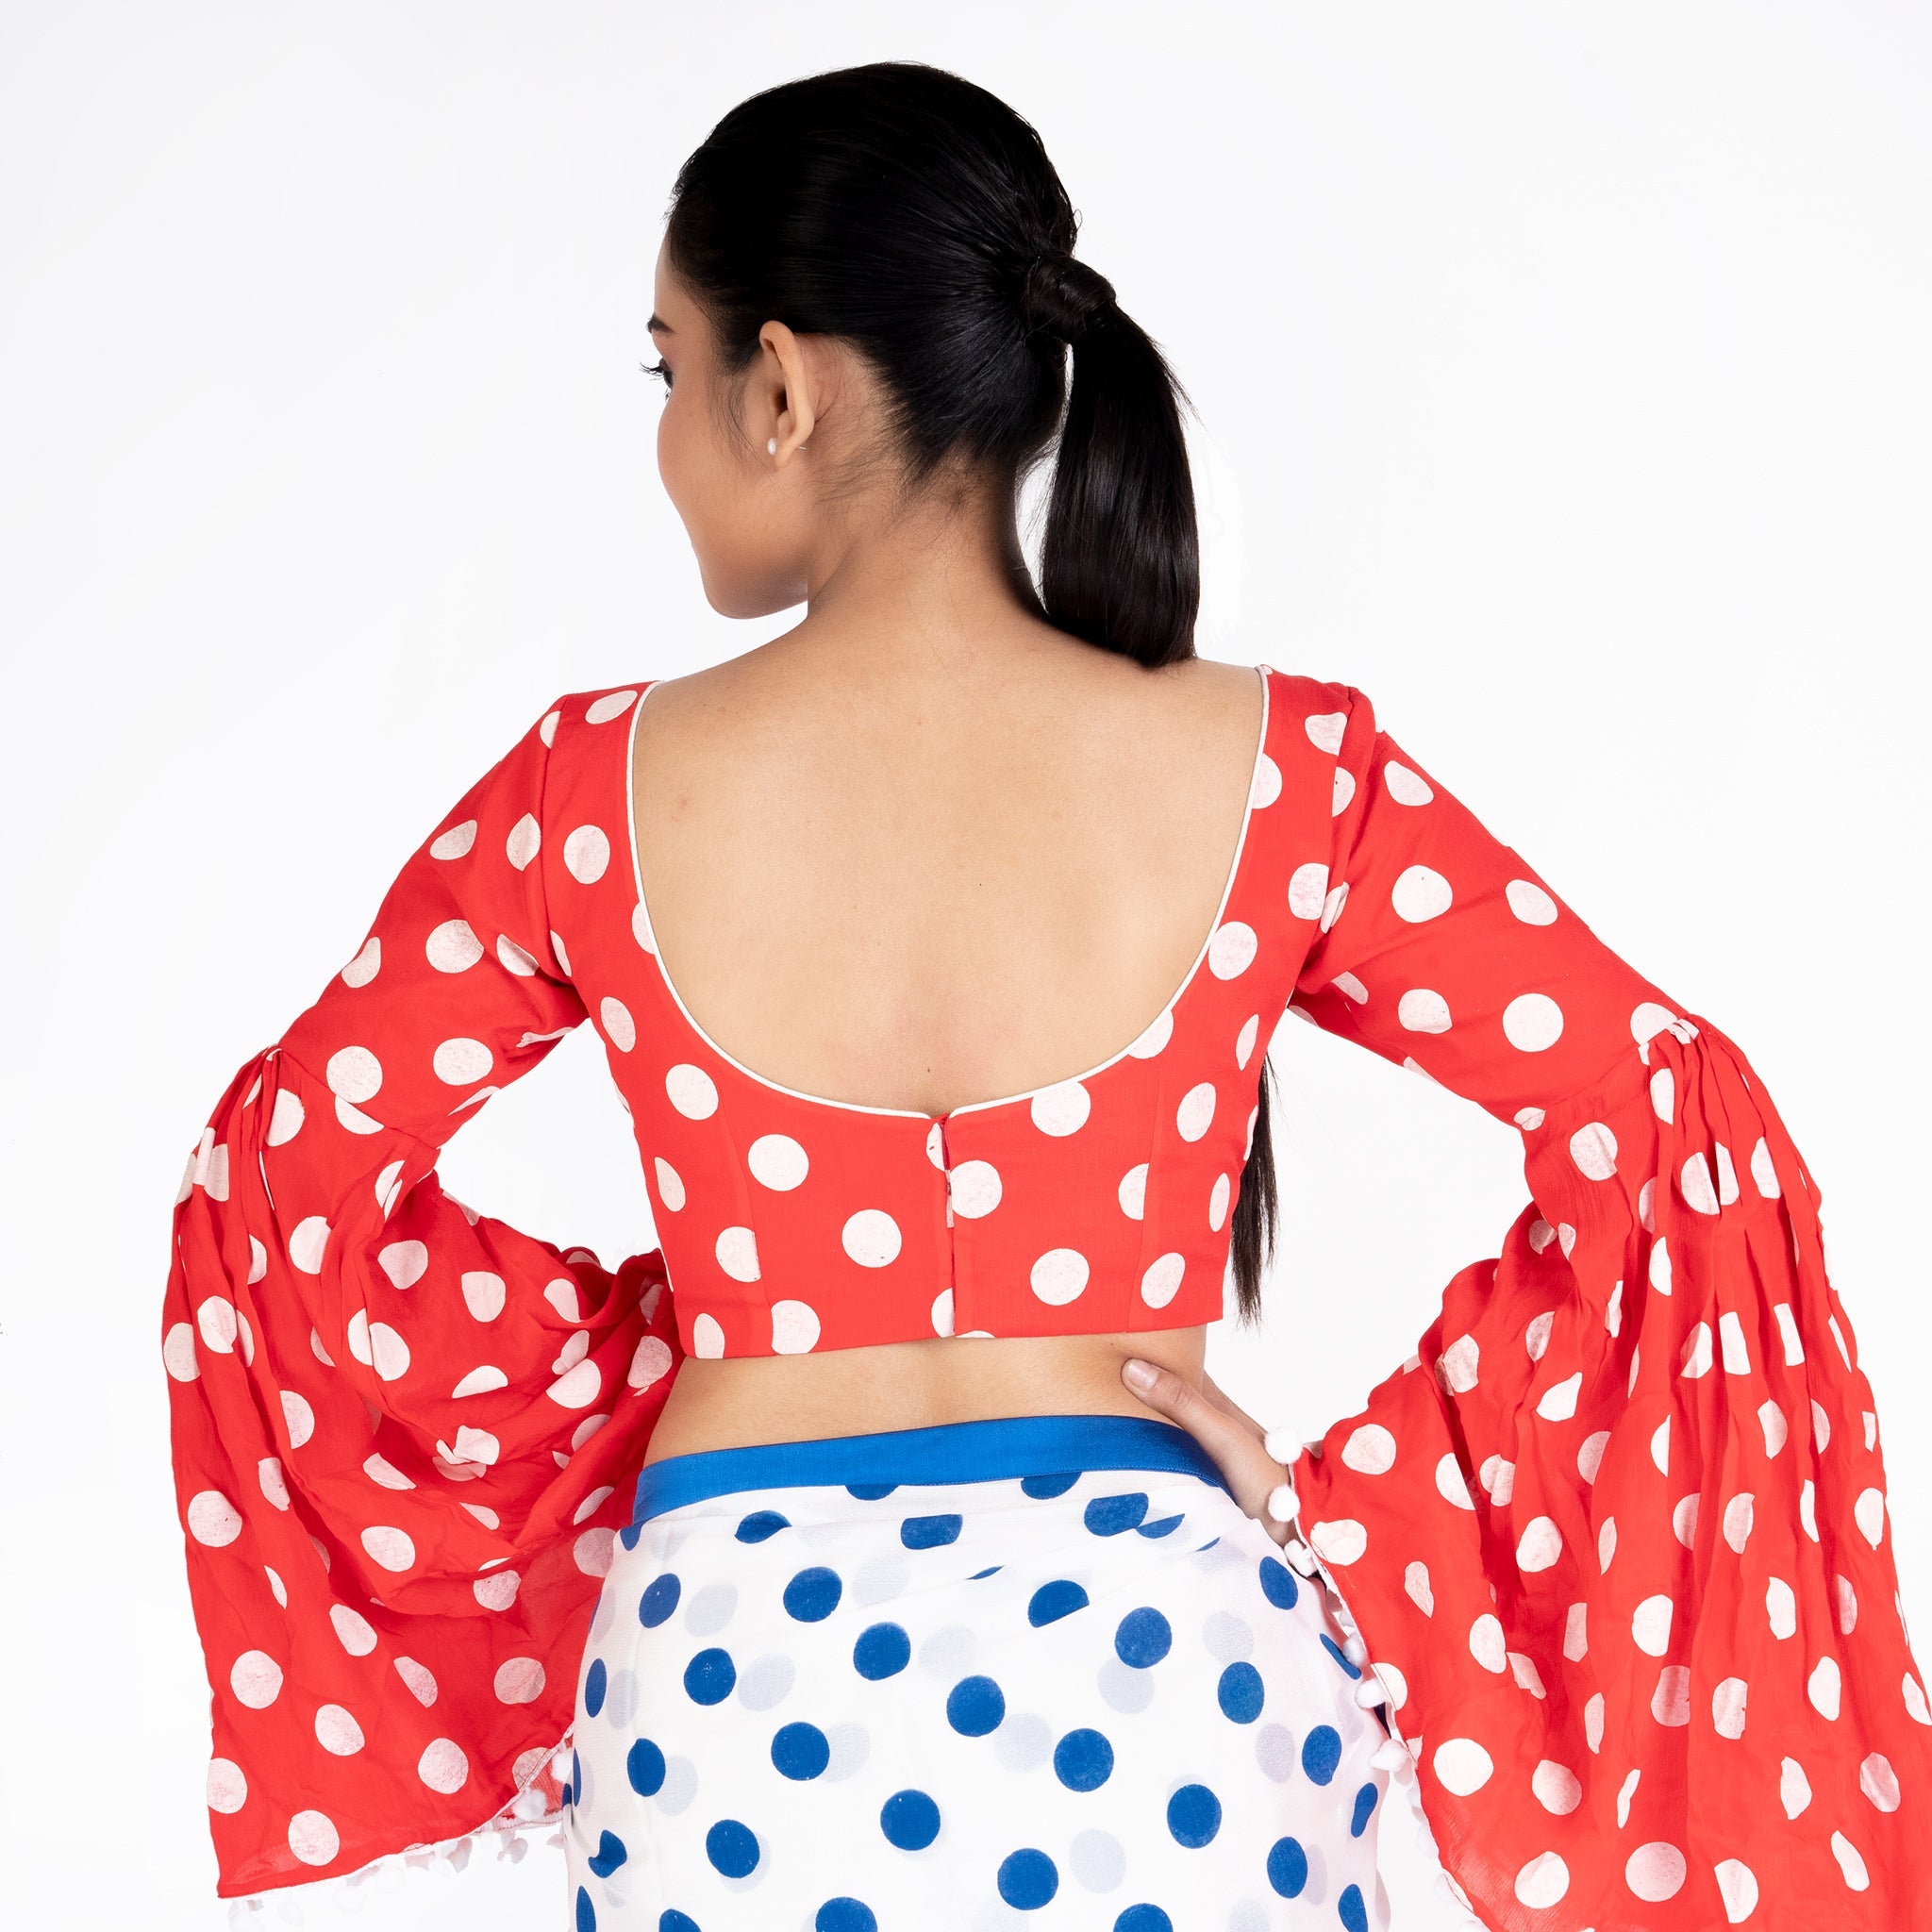 Women's Red Polka Dotted Chiffon Padded Blouse - Boveee